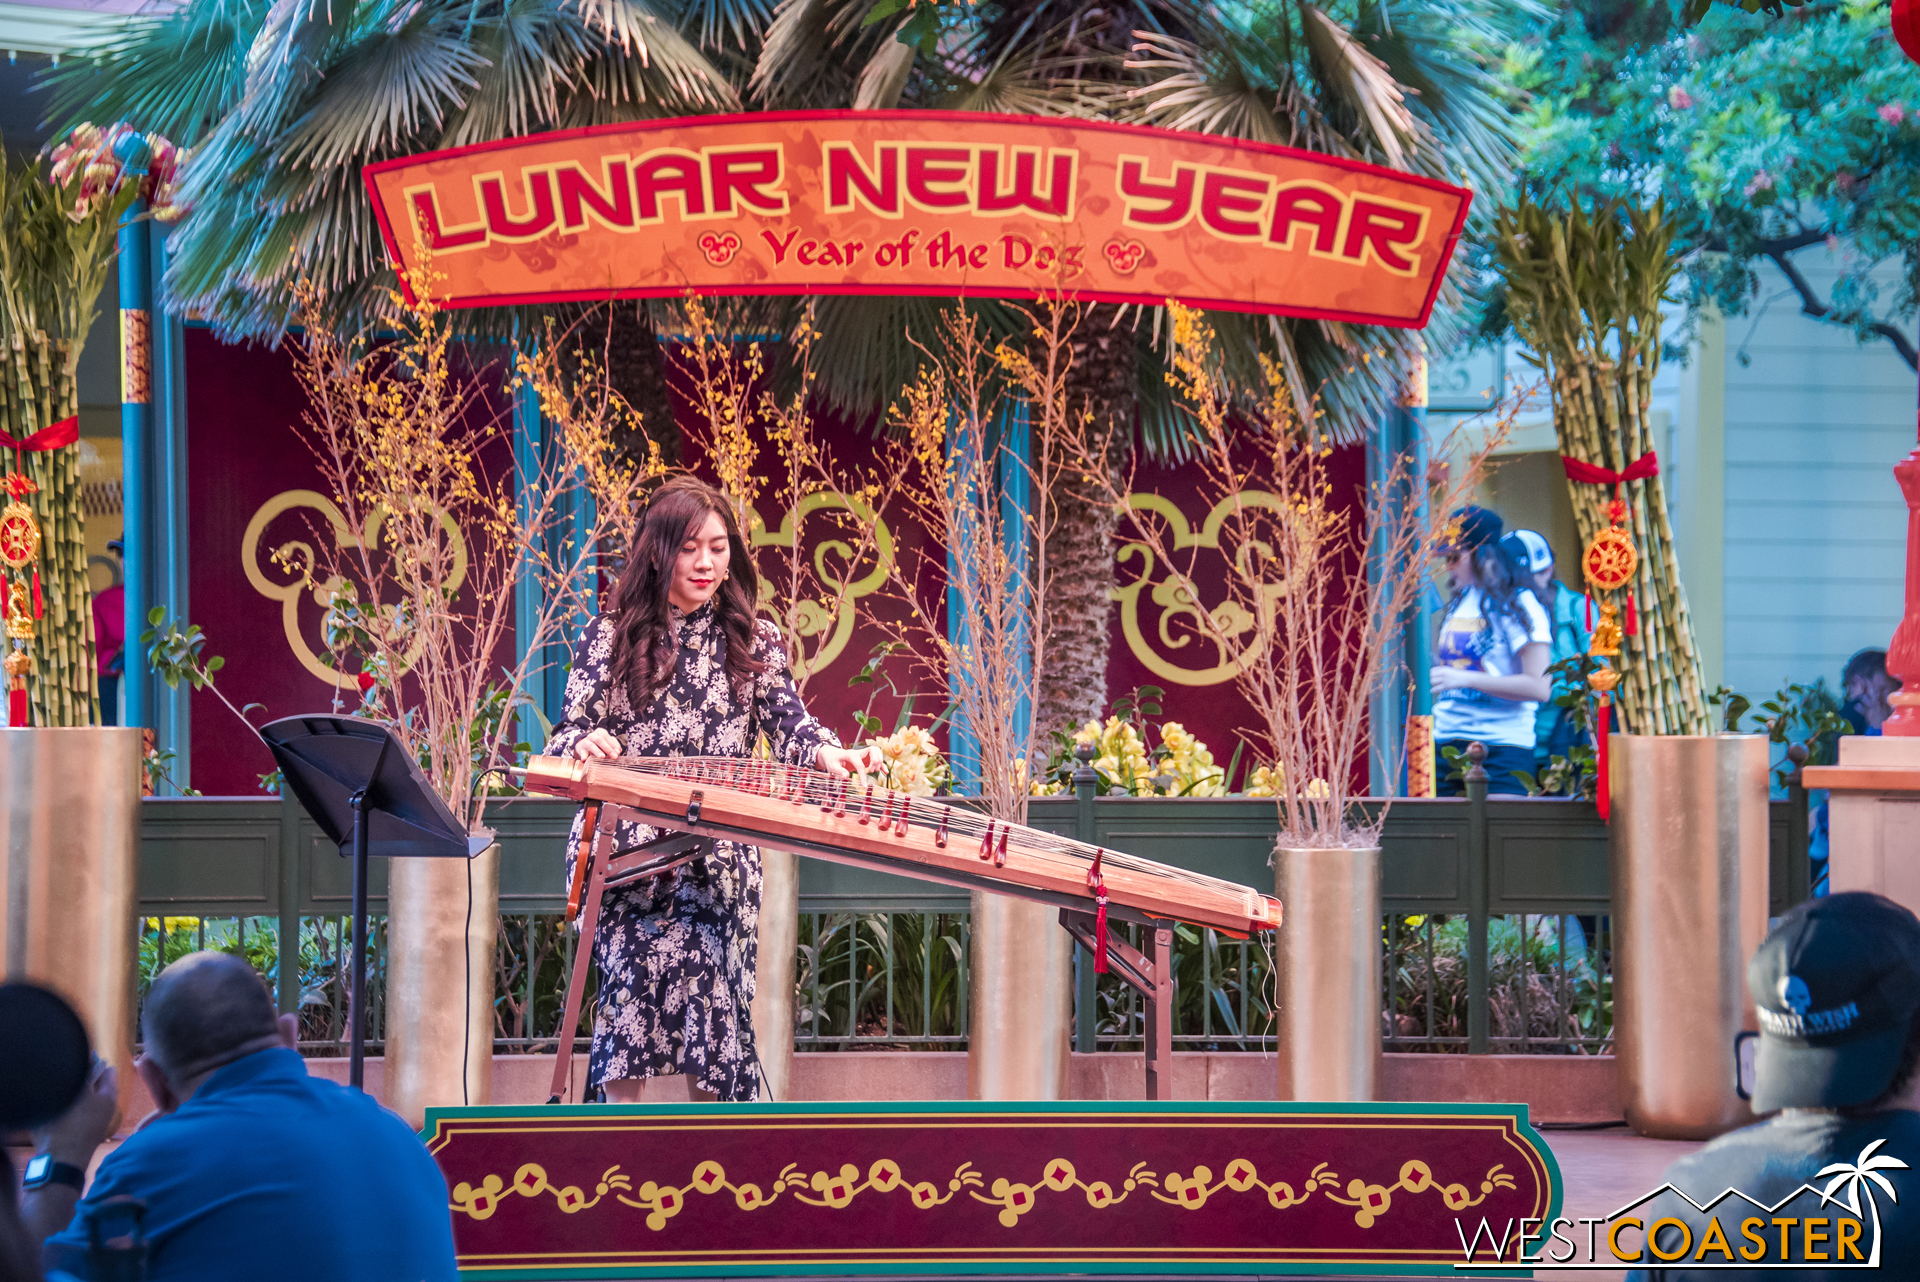  Luna Lee has several 15 minute sets in the Paradise Garden Bandstand. 